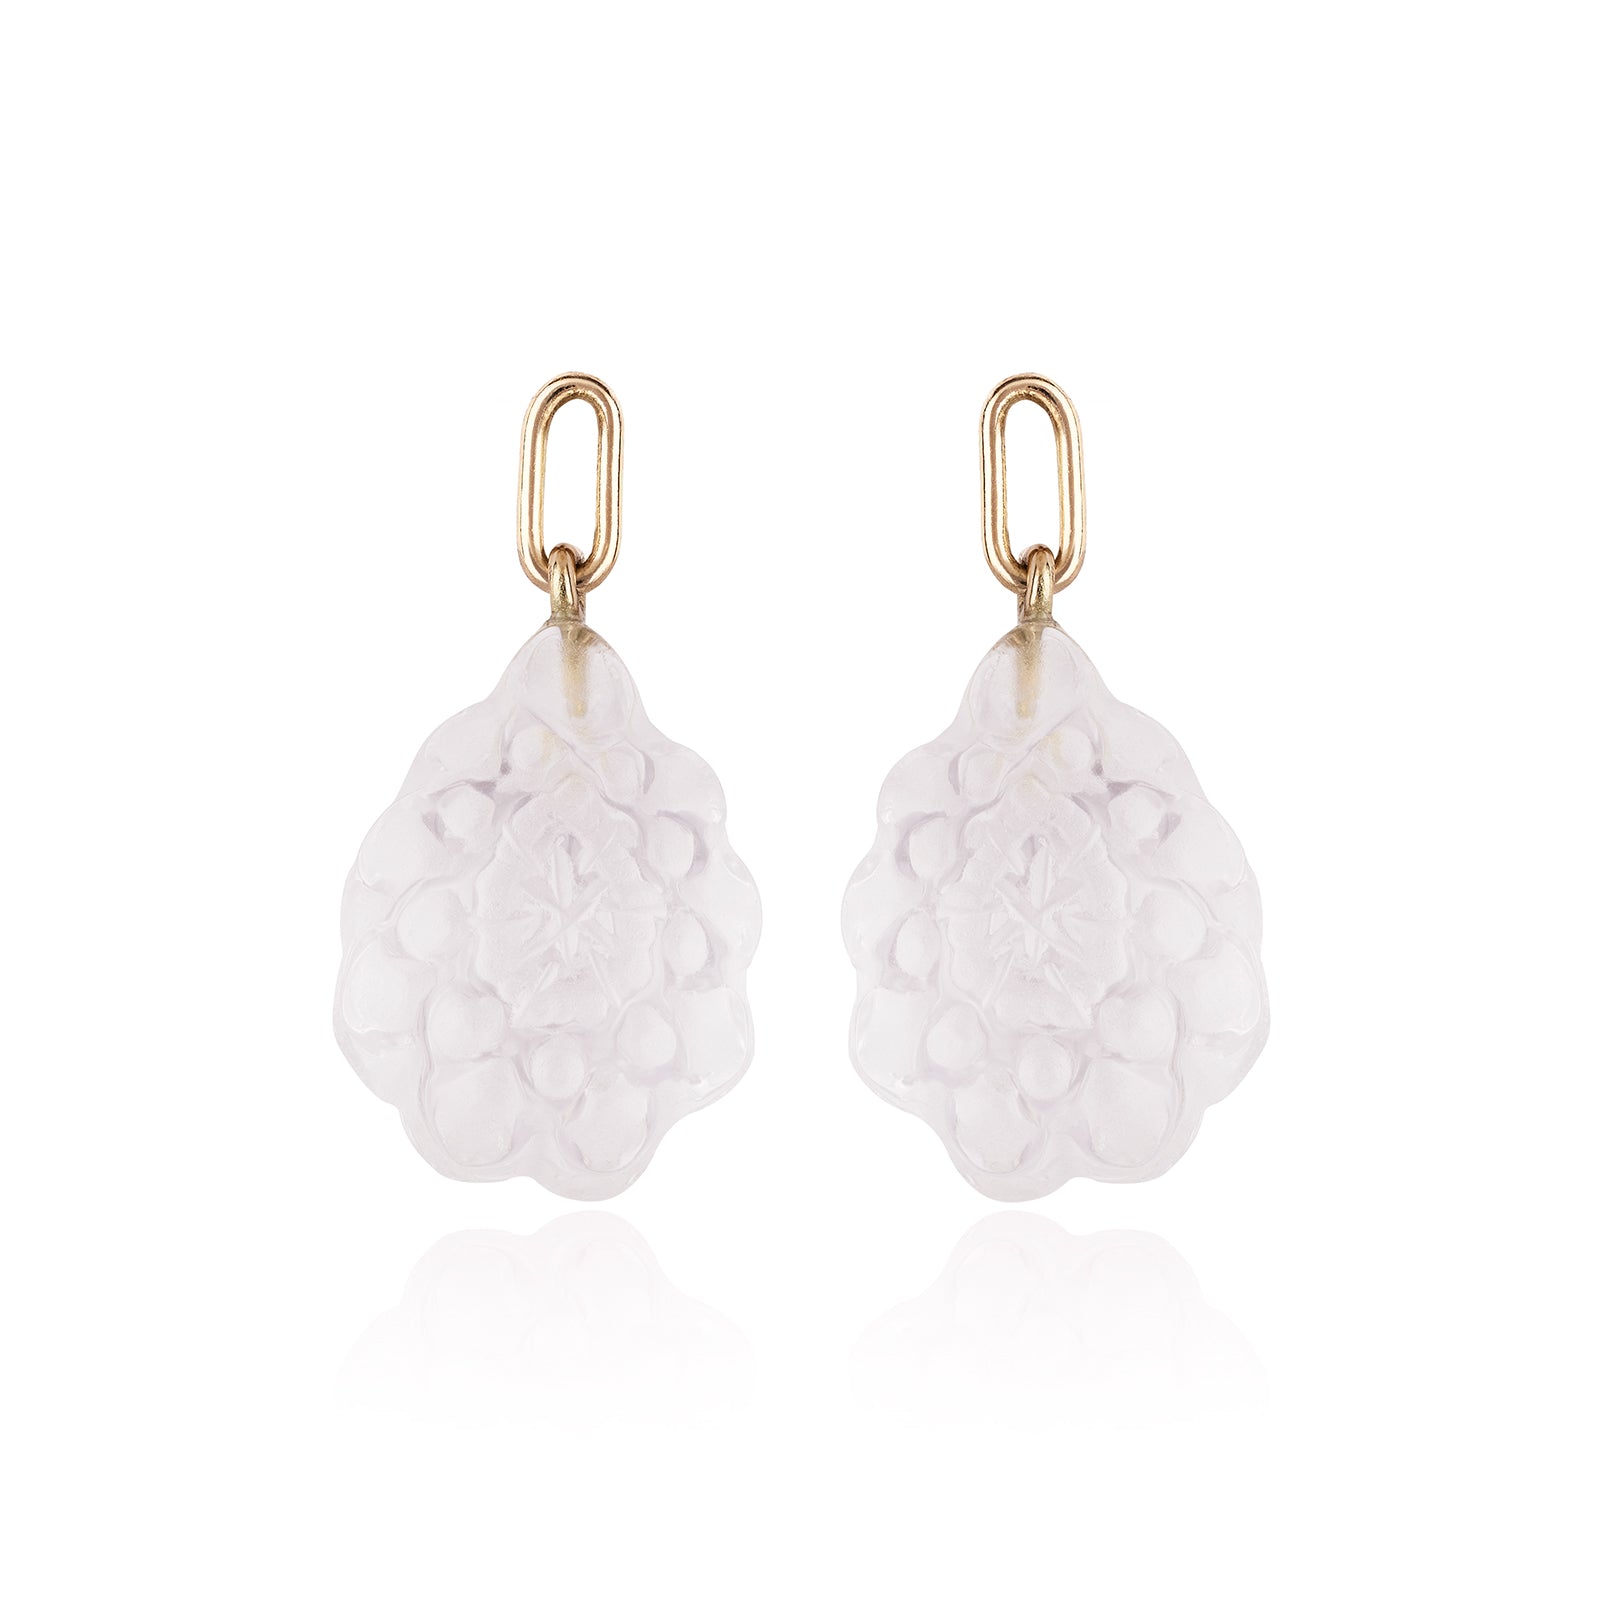 Carved Frosted Quartz Venice Earring Pendants by McFarlane Fine Jewellery